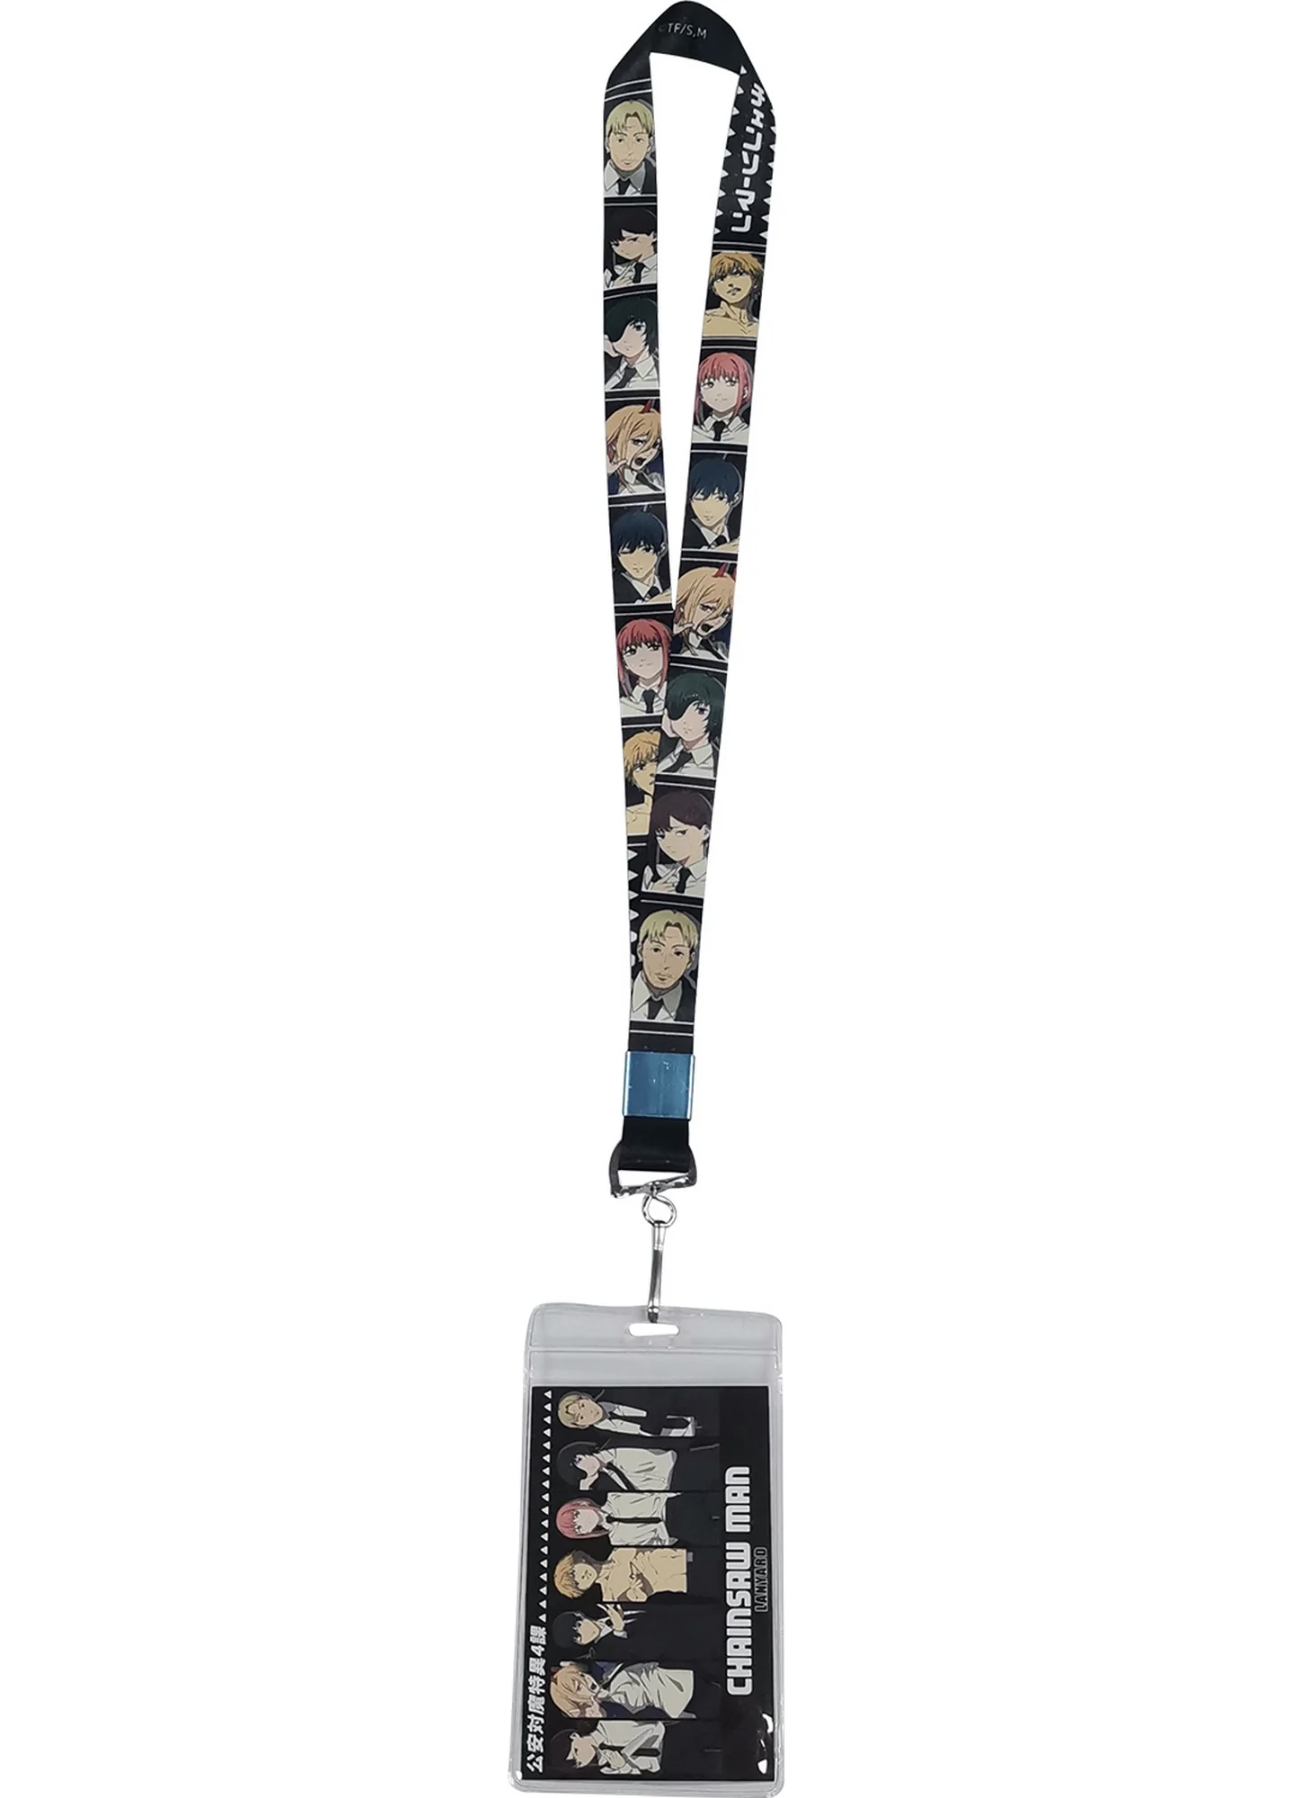 Chainsaw Man - Special Divison 4 Lanyard image count 0